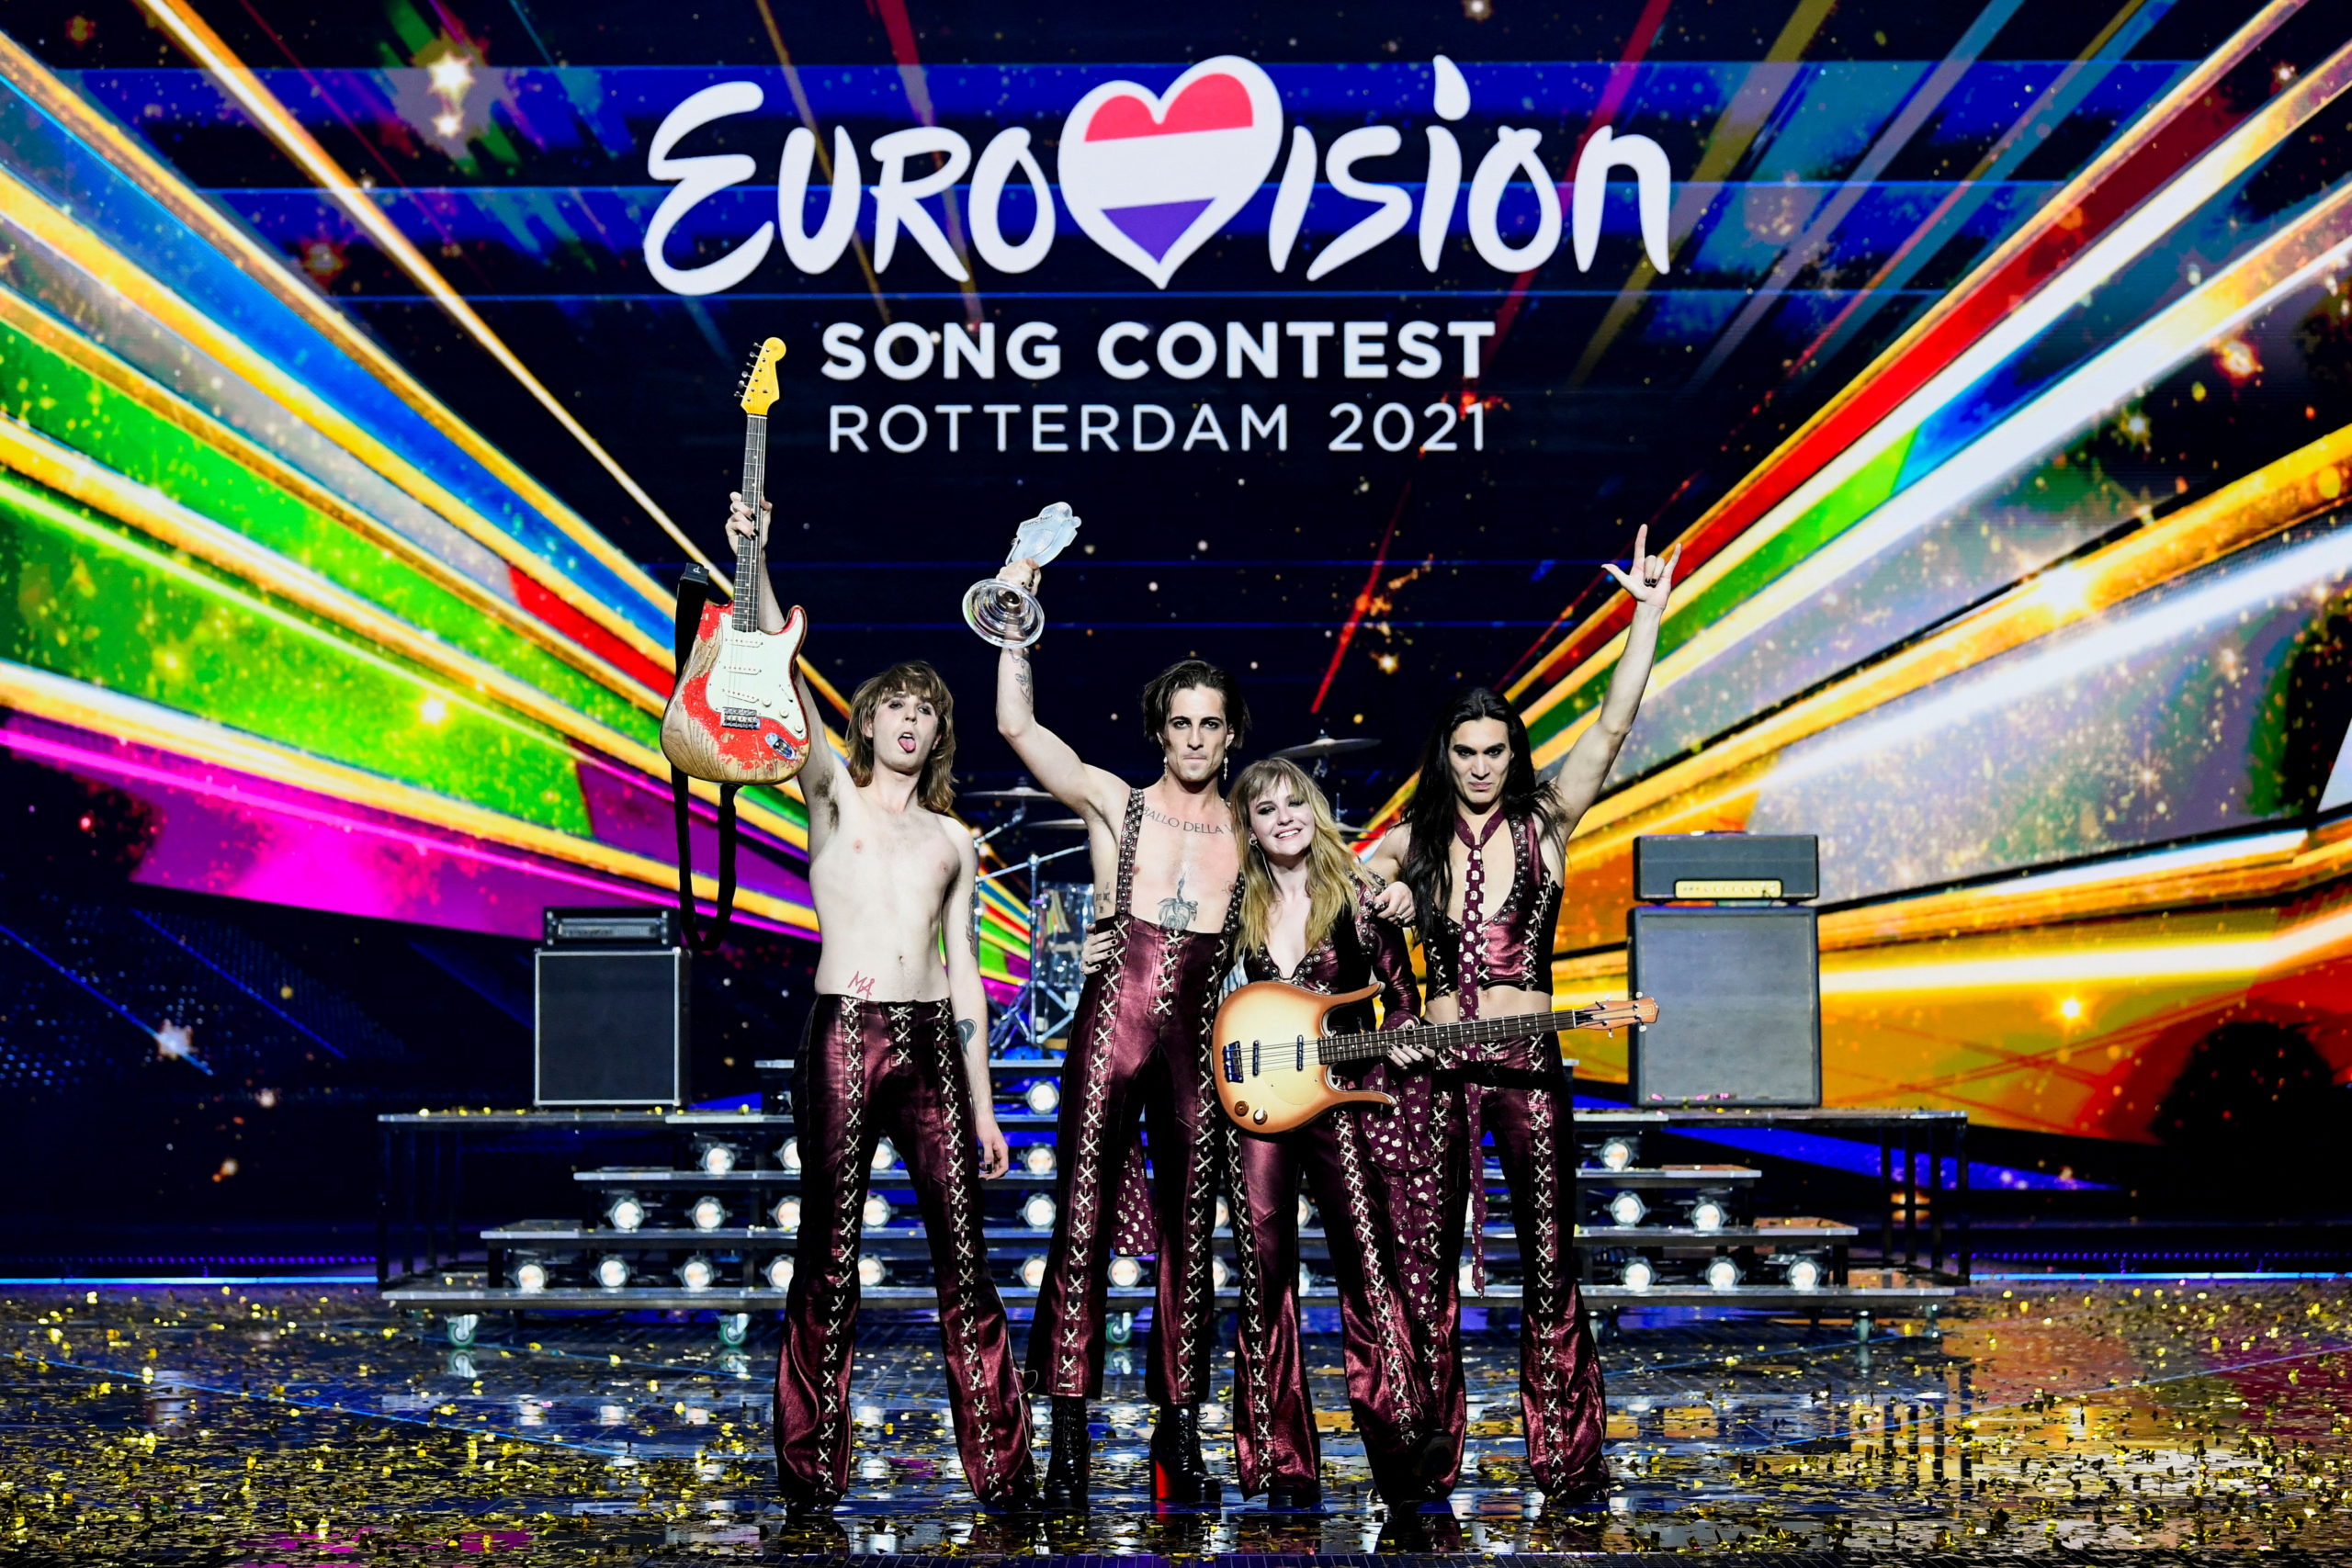 Italy's raucous glam rock takes Eurovision by storm Inquirer